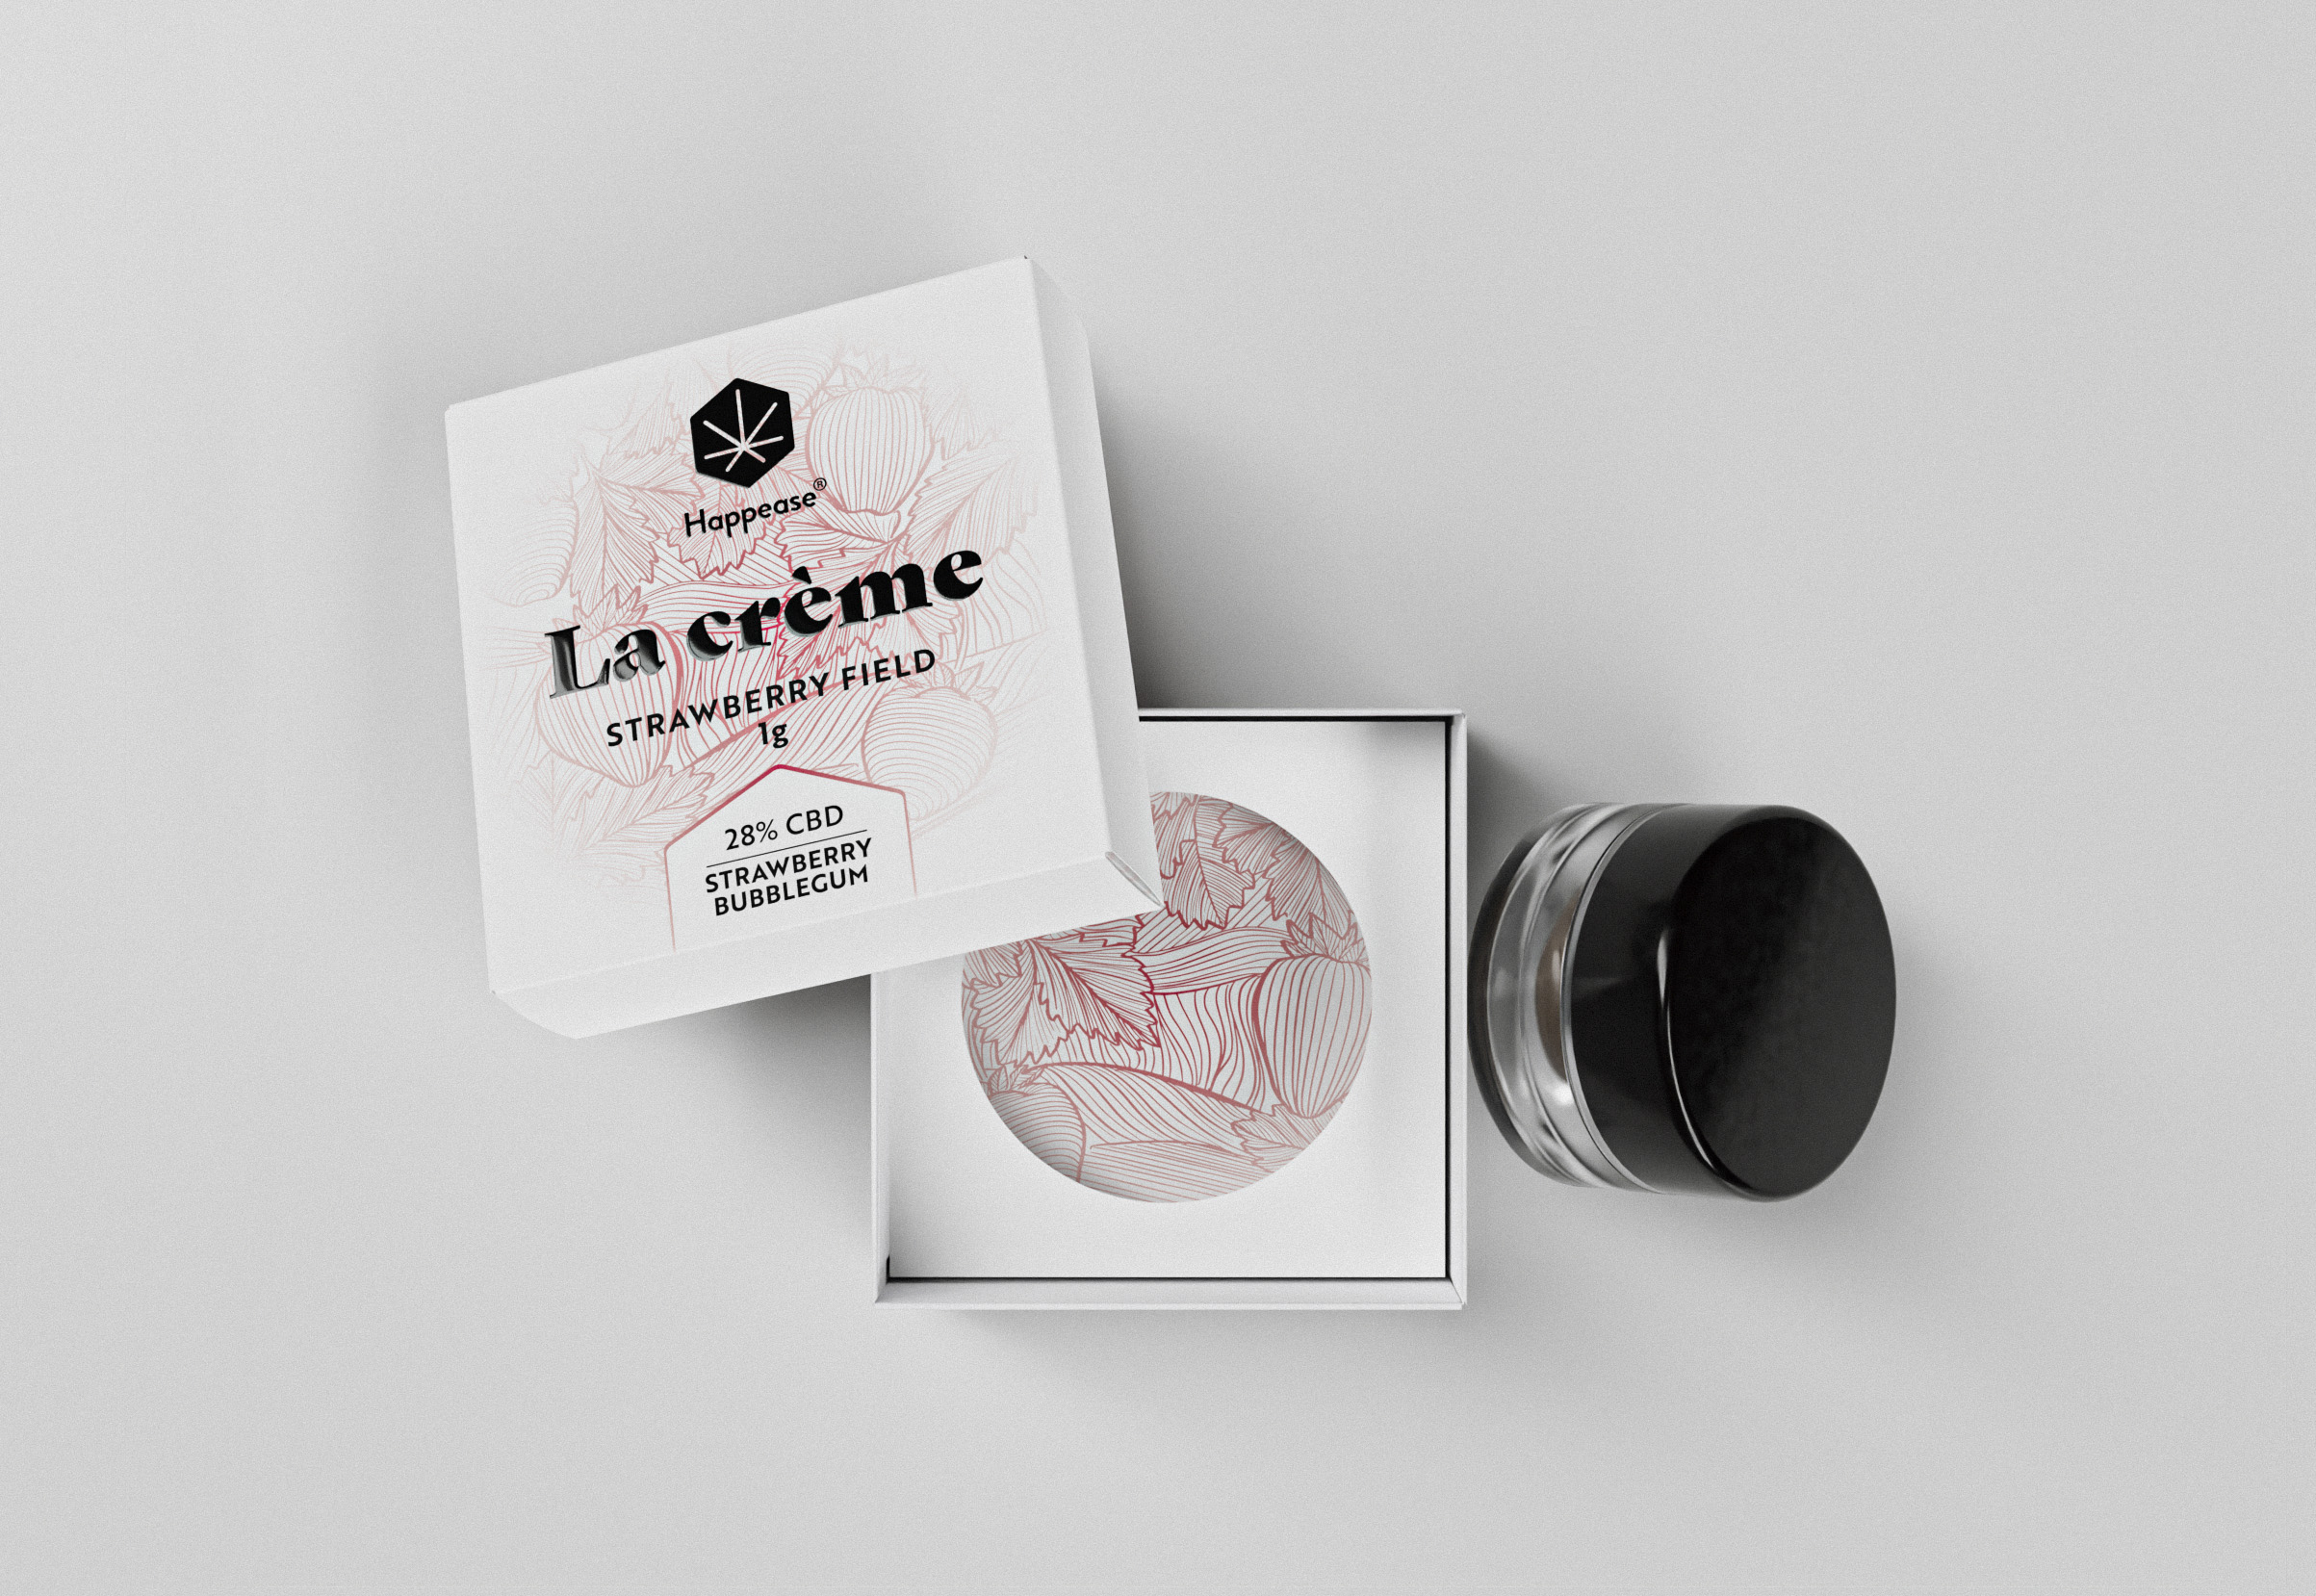 Happease_extract_la-creme_SF_from-top